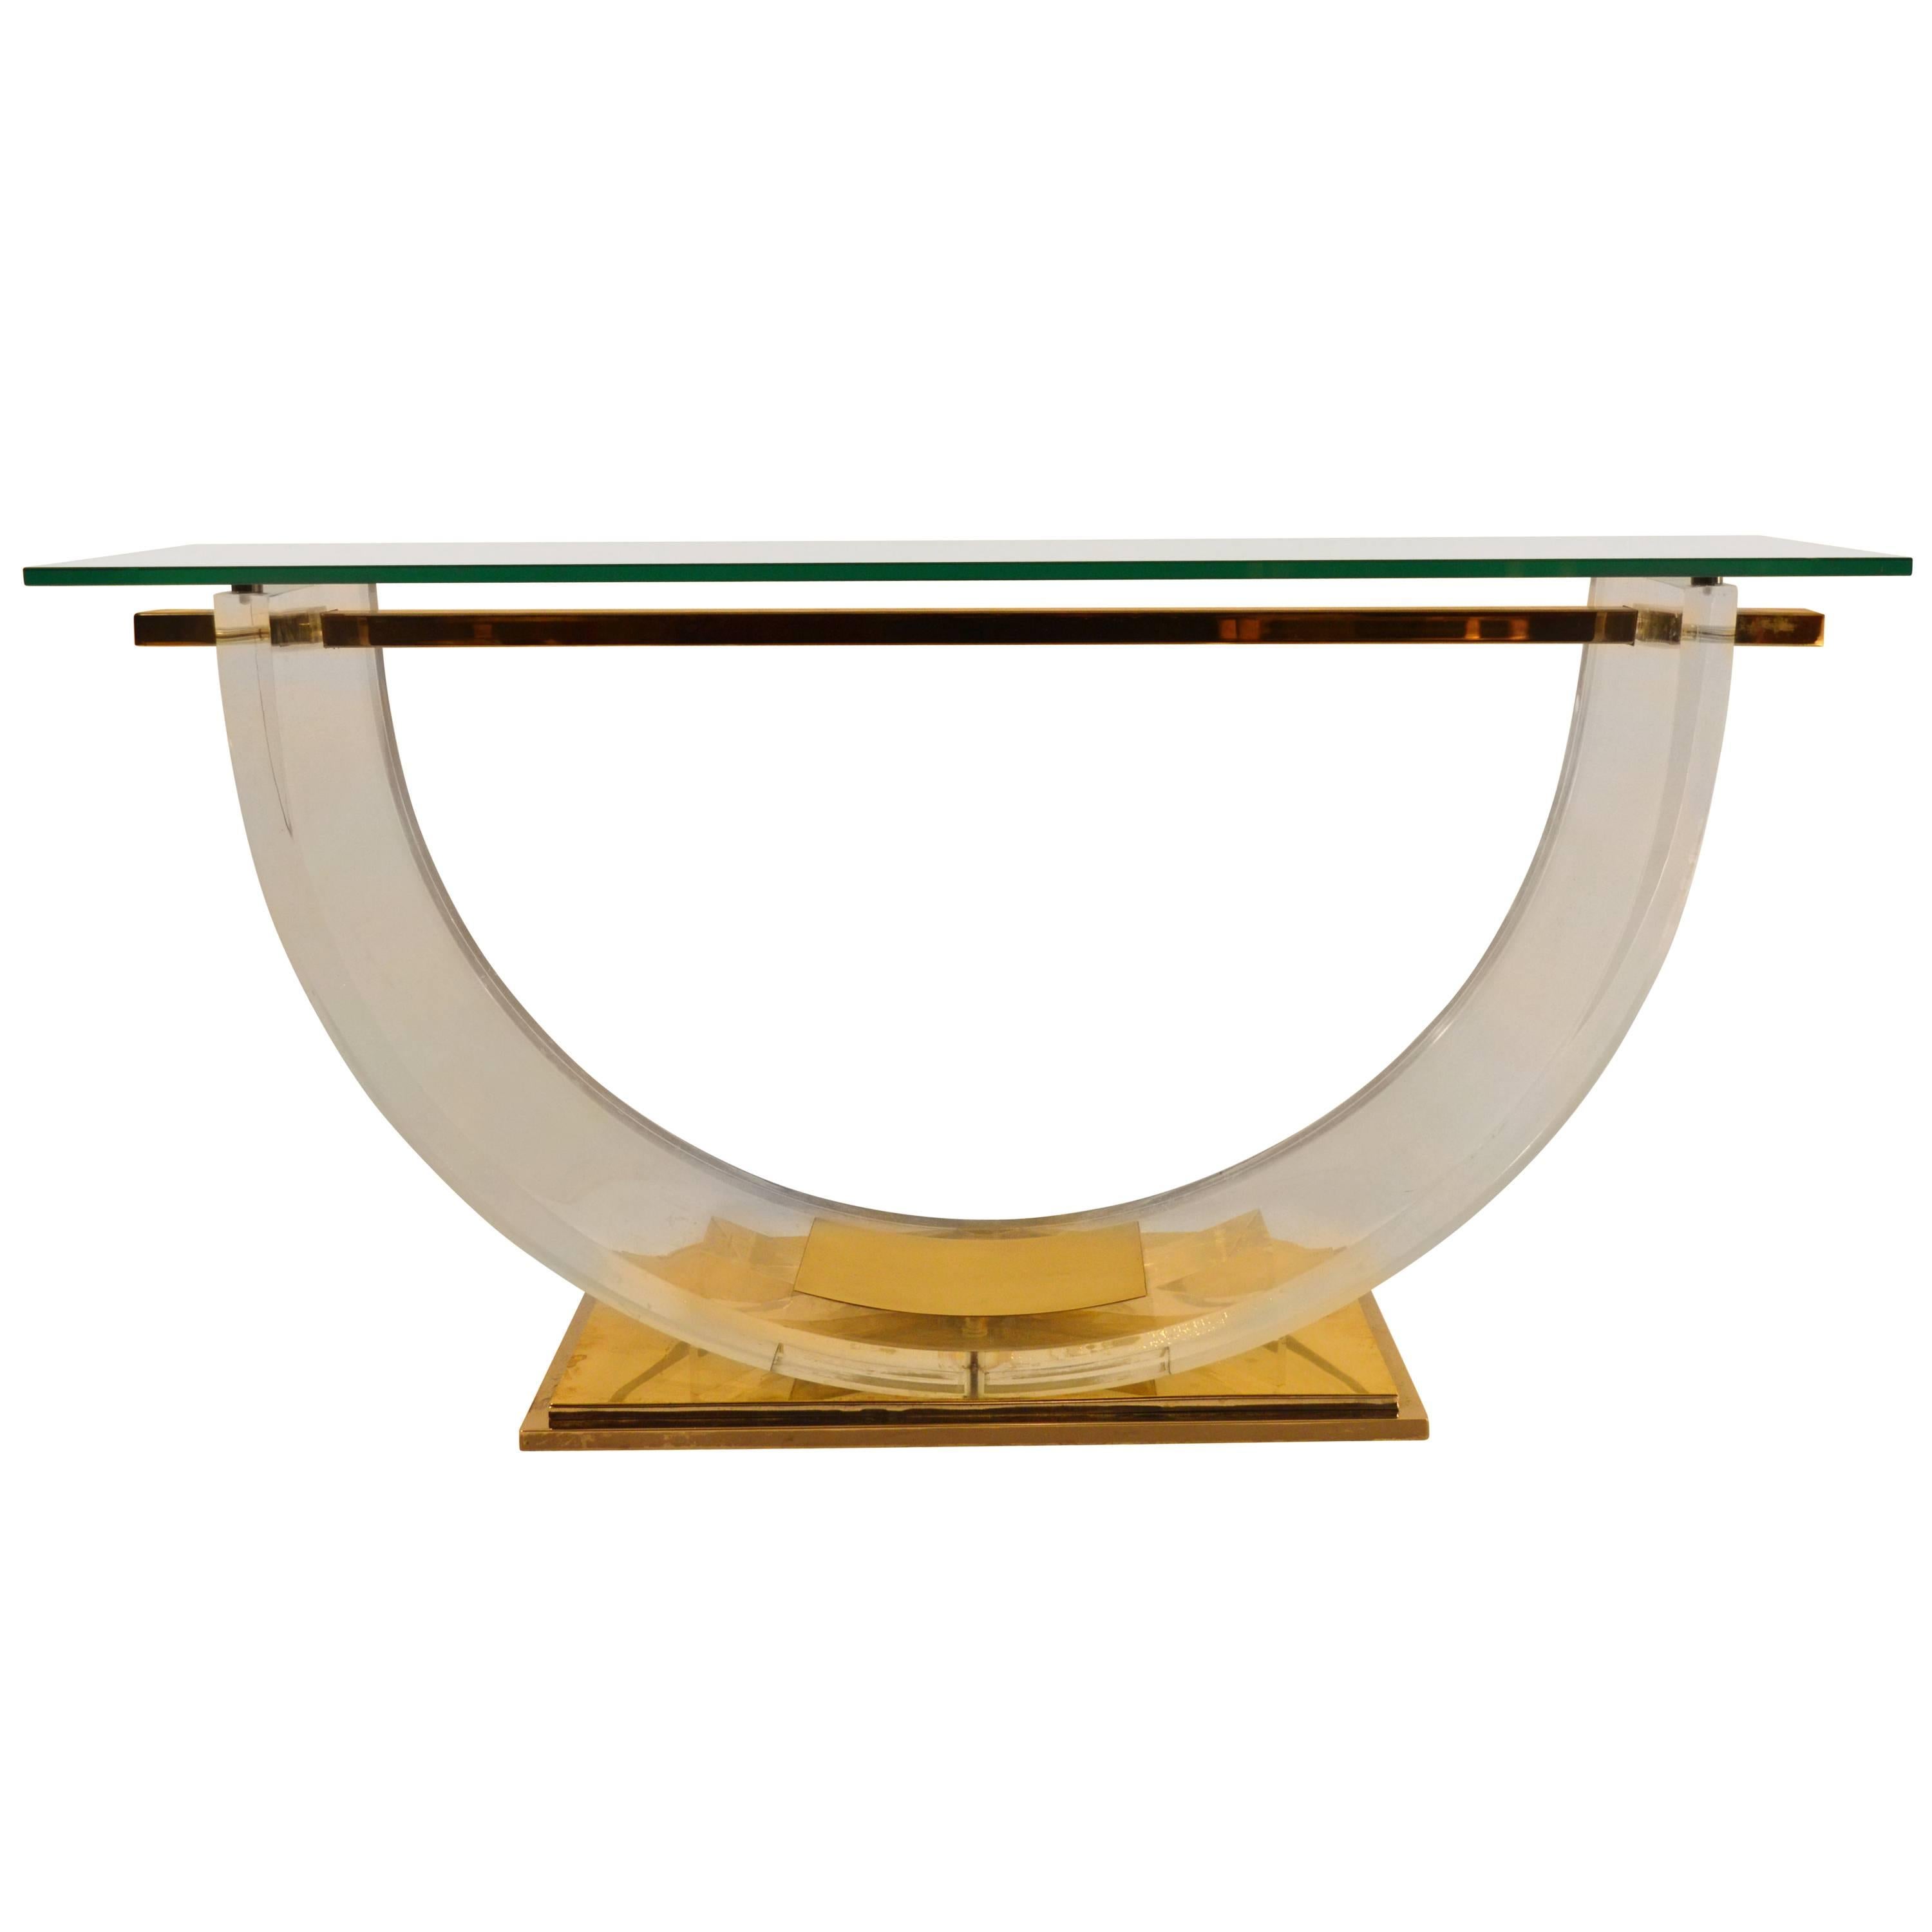 Plexiglass or Perspex Console with Iron and Brass Base and Glass Top